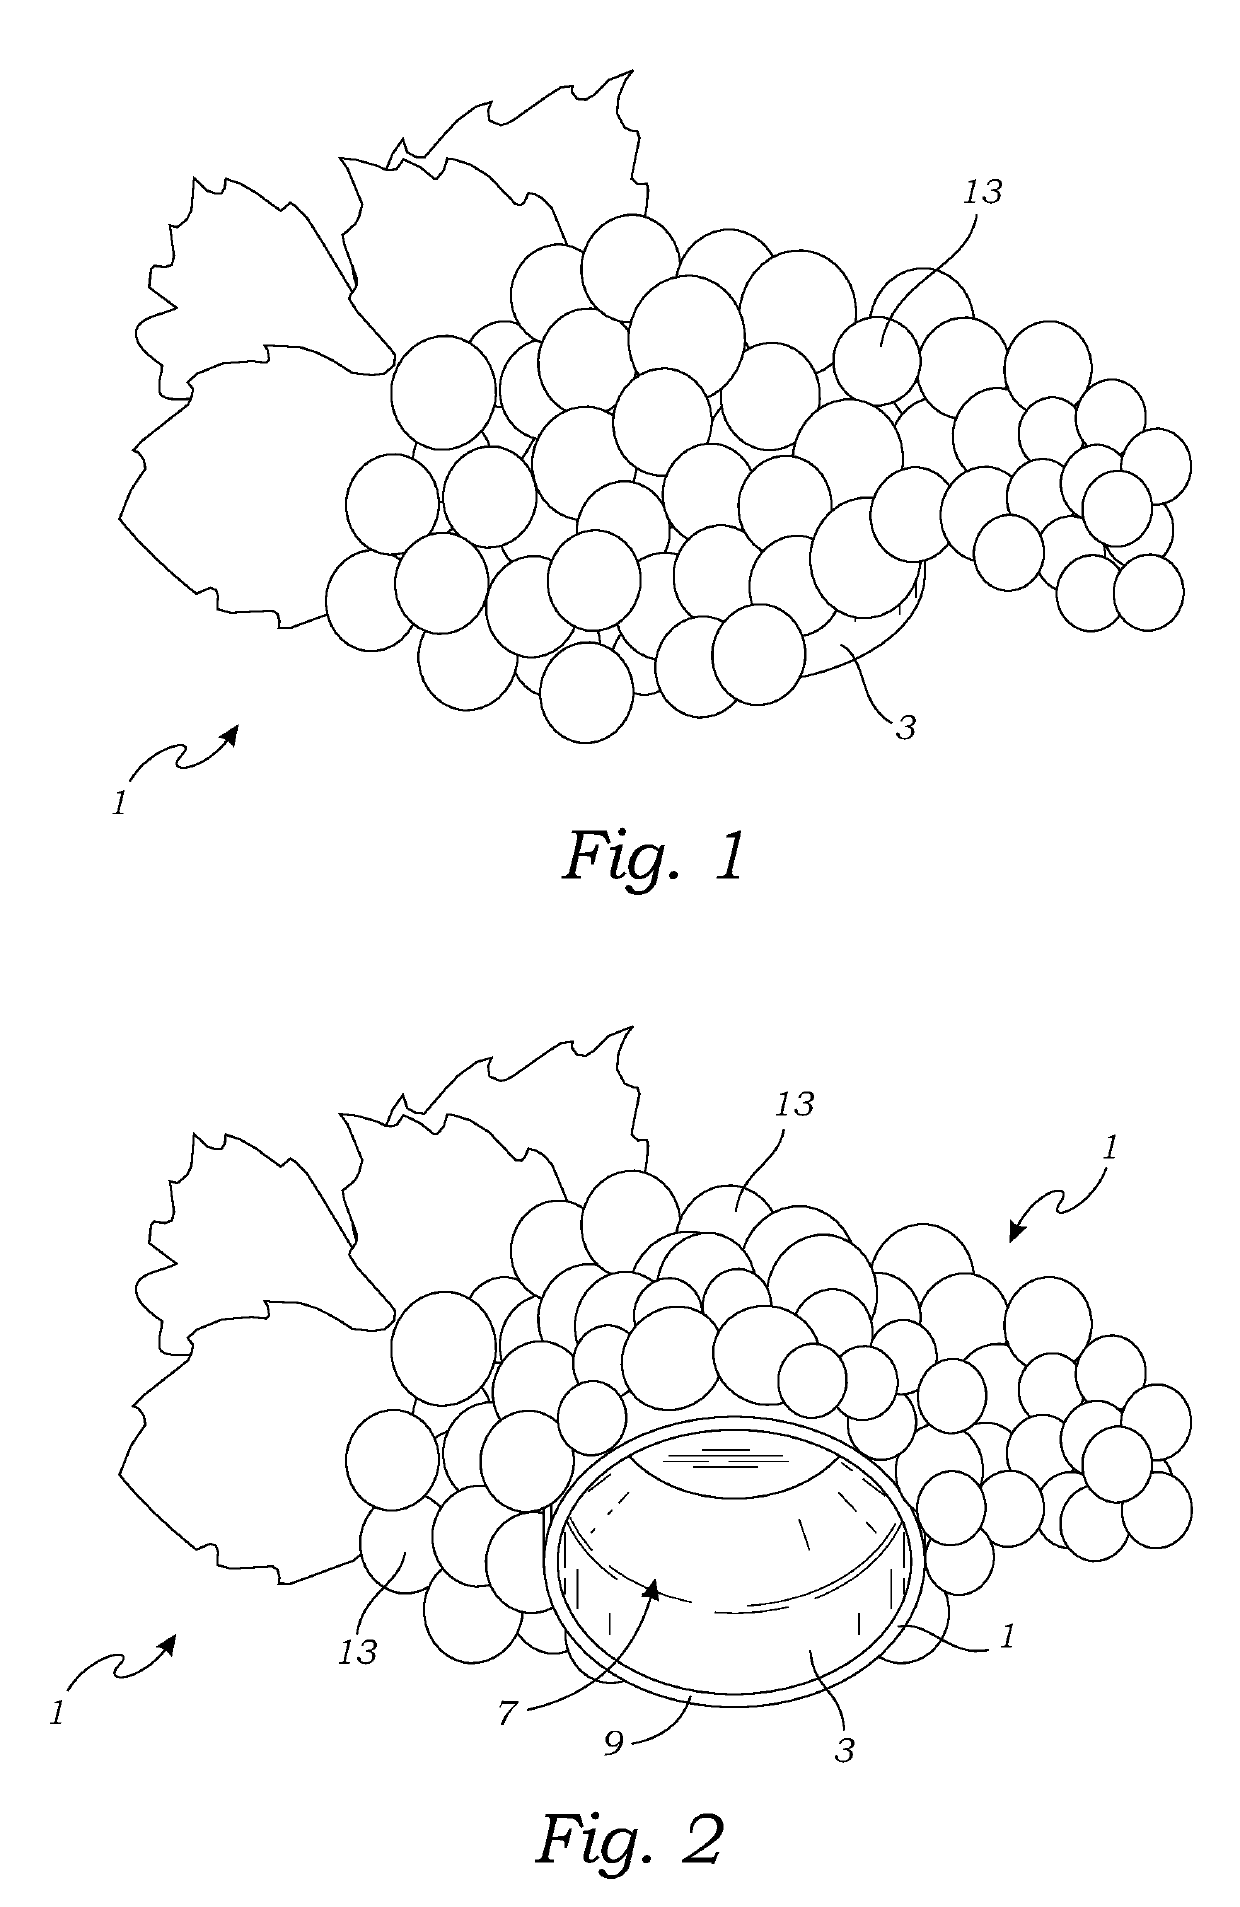 Vacuum wine bottle stopper and cap, and method of use